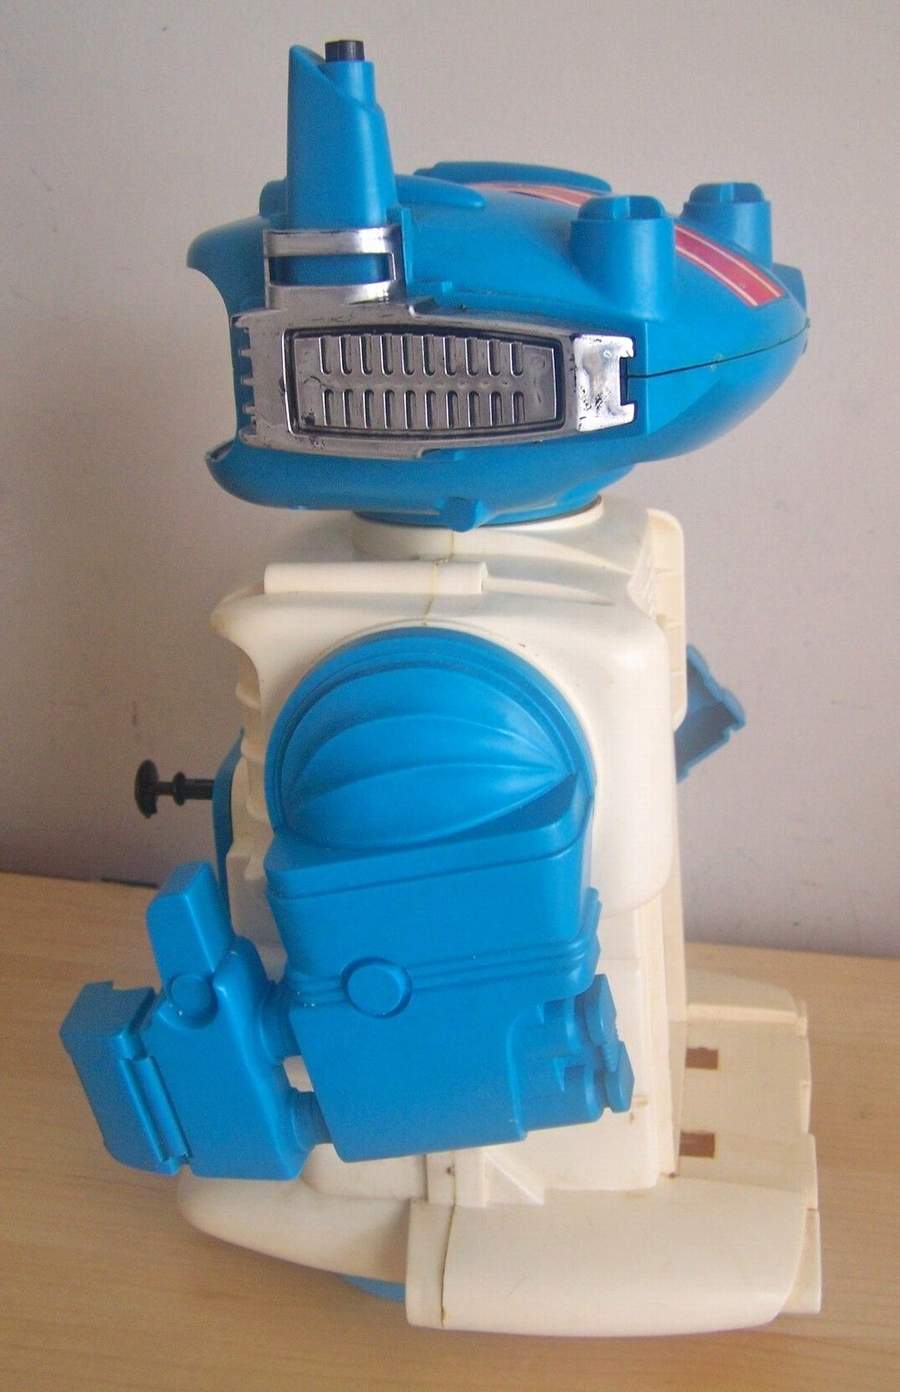 Mister Brain by Remco 1969 - The Old Robots Web Site